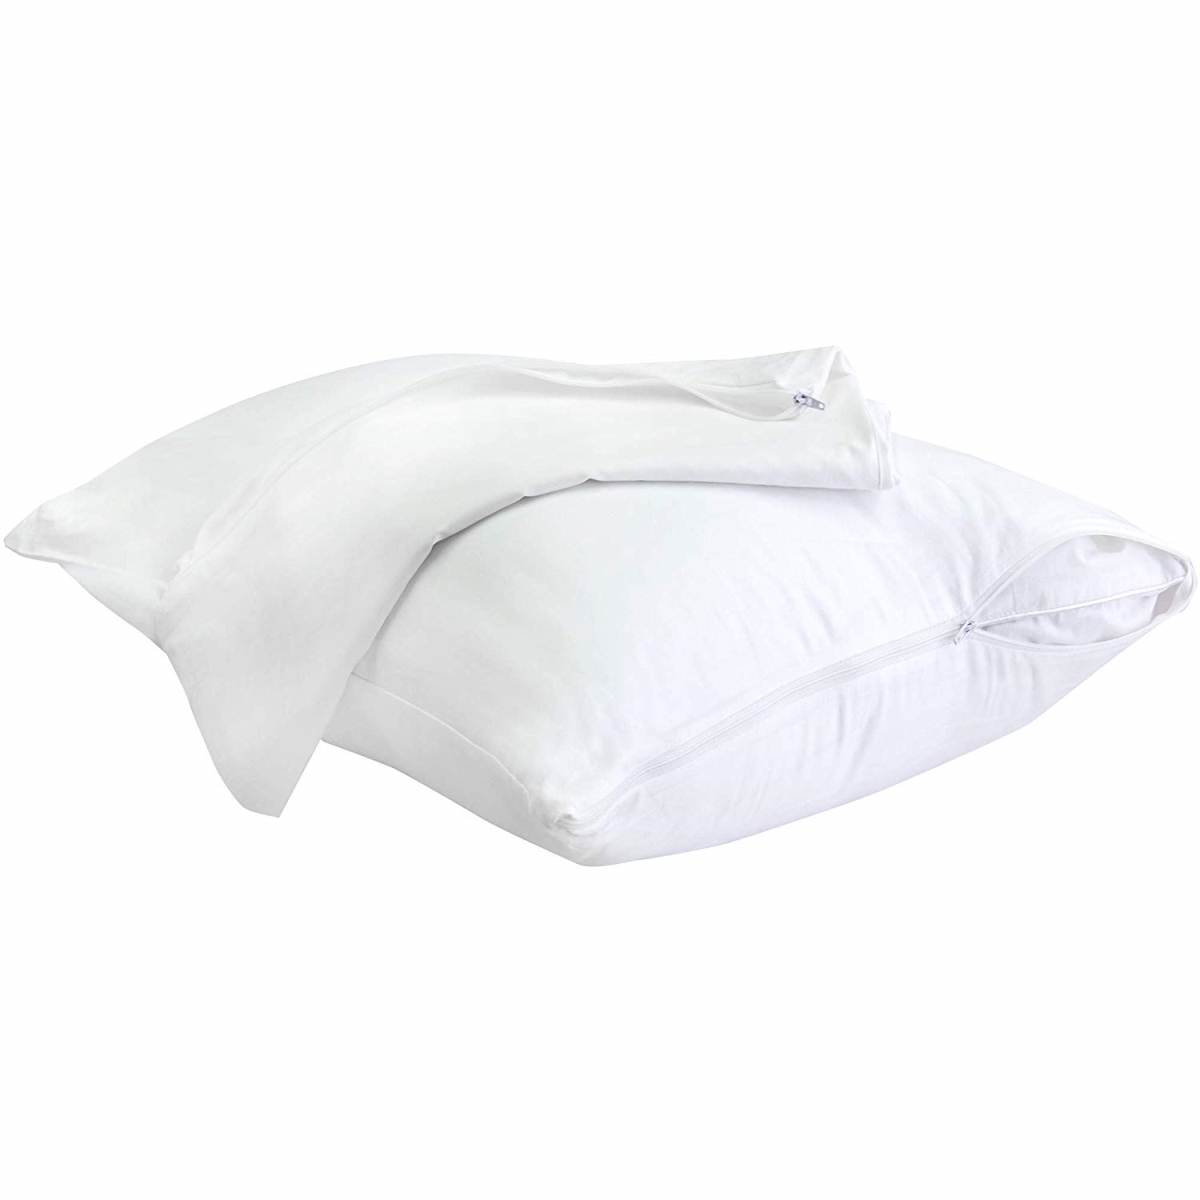 733418 Sleep Solutions By Stain Resistant Cotton Pillow Protector - White, King Size - Pack Of 2